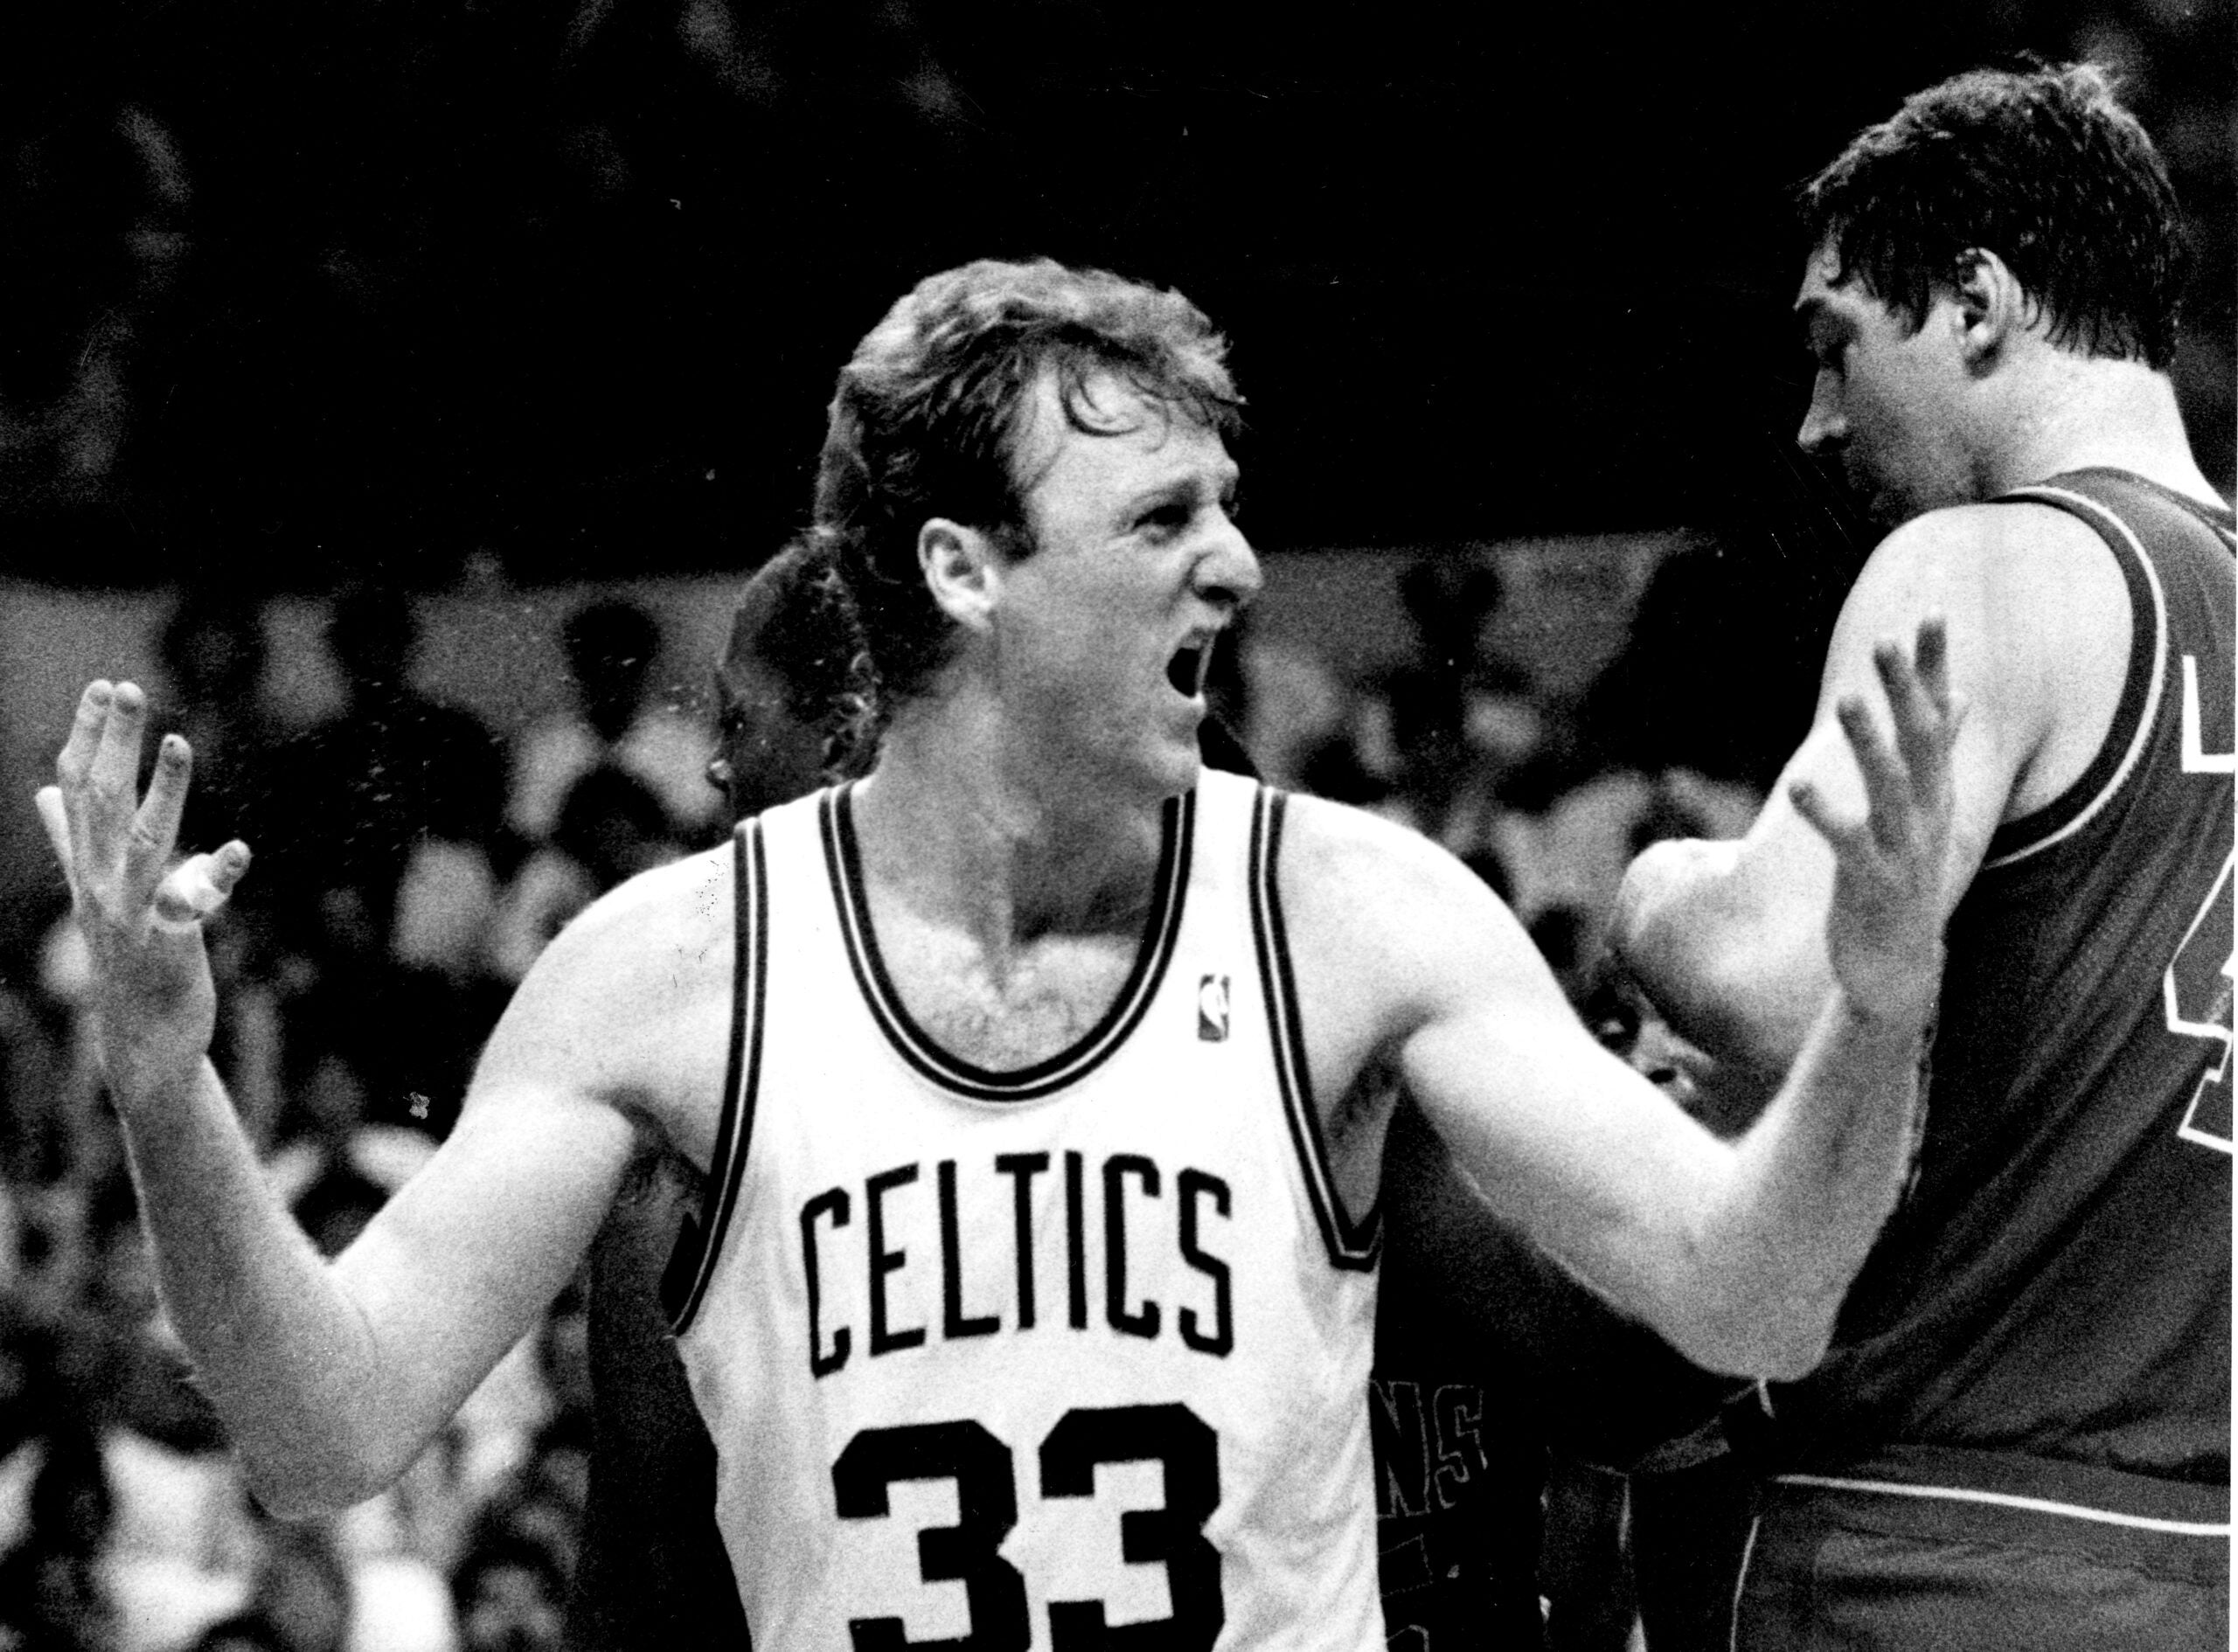 Danny Ainge is one of the most underrated and Athletic athletes in spo